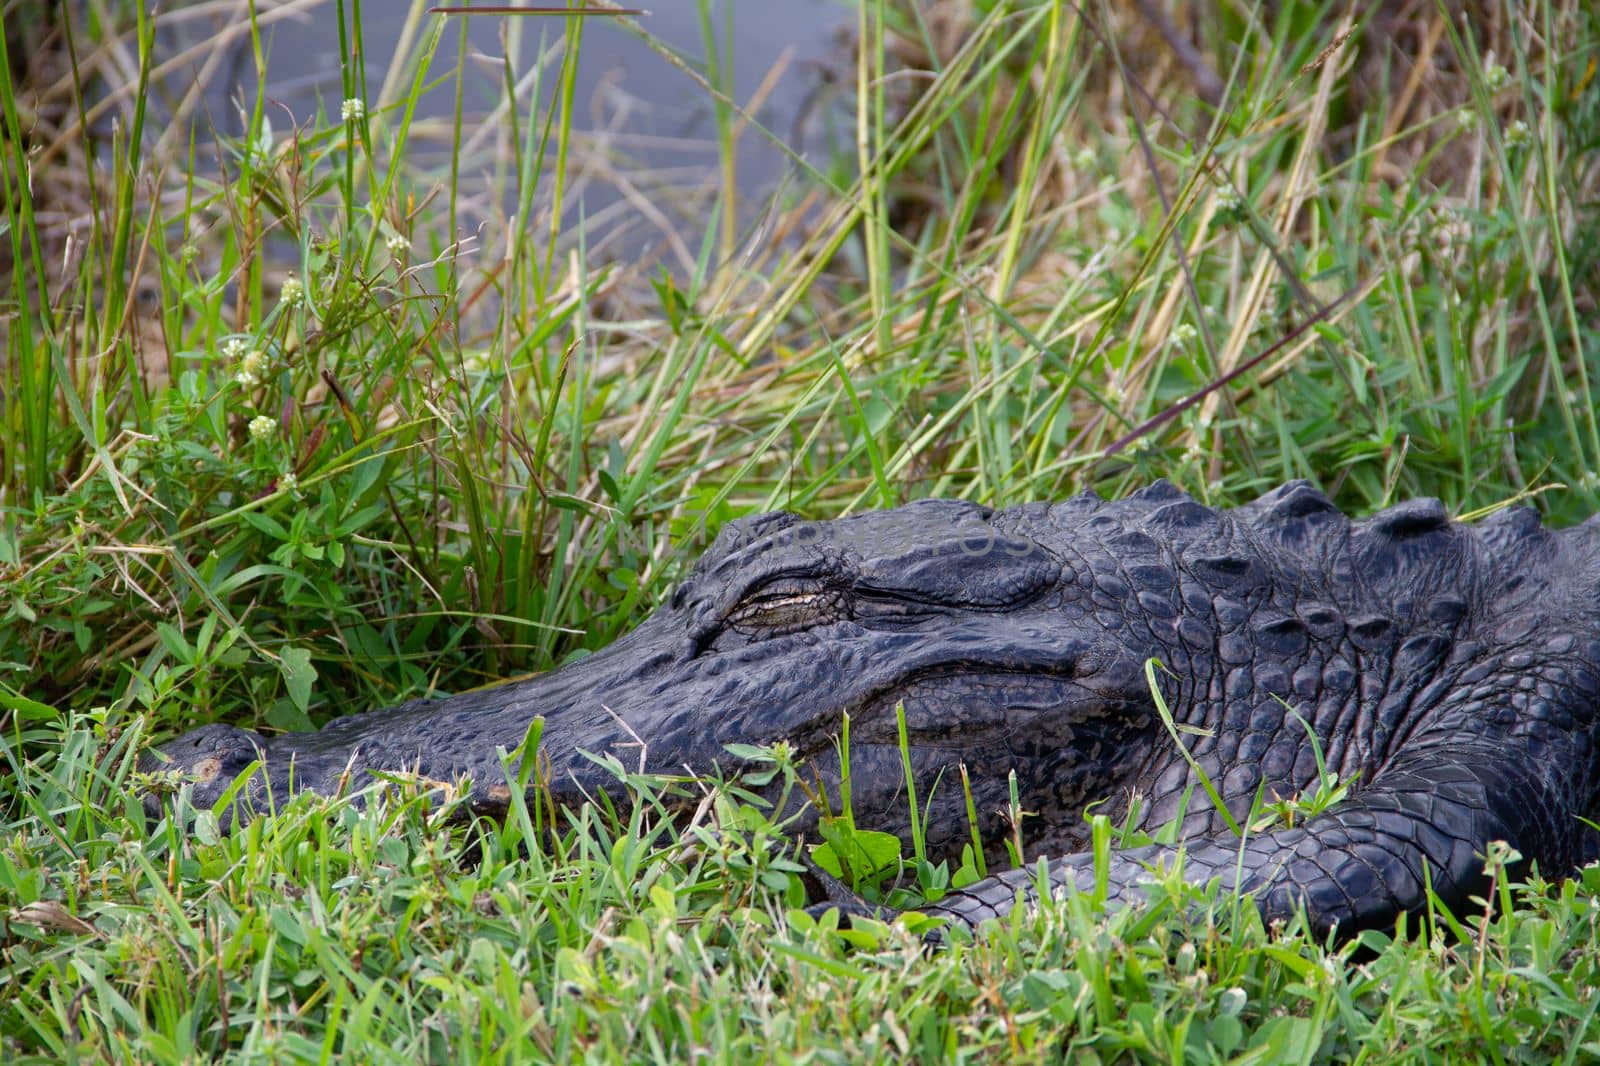 Close-up of an American alligator hiding in grass and sleeping, Florida, United States